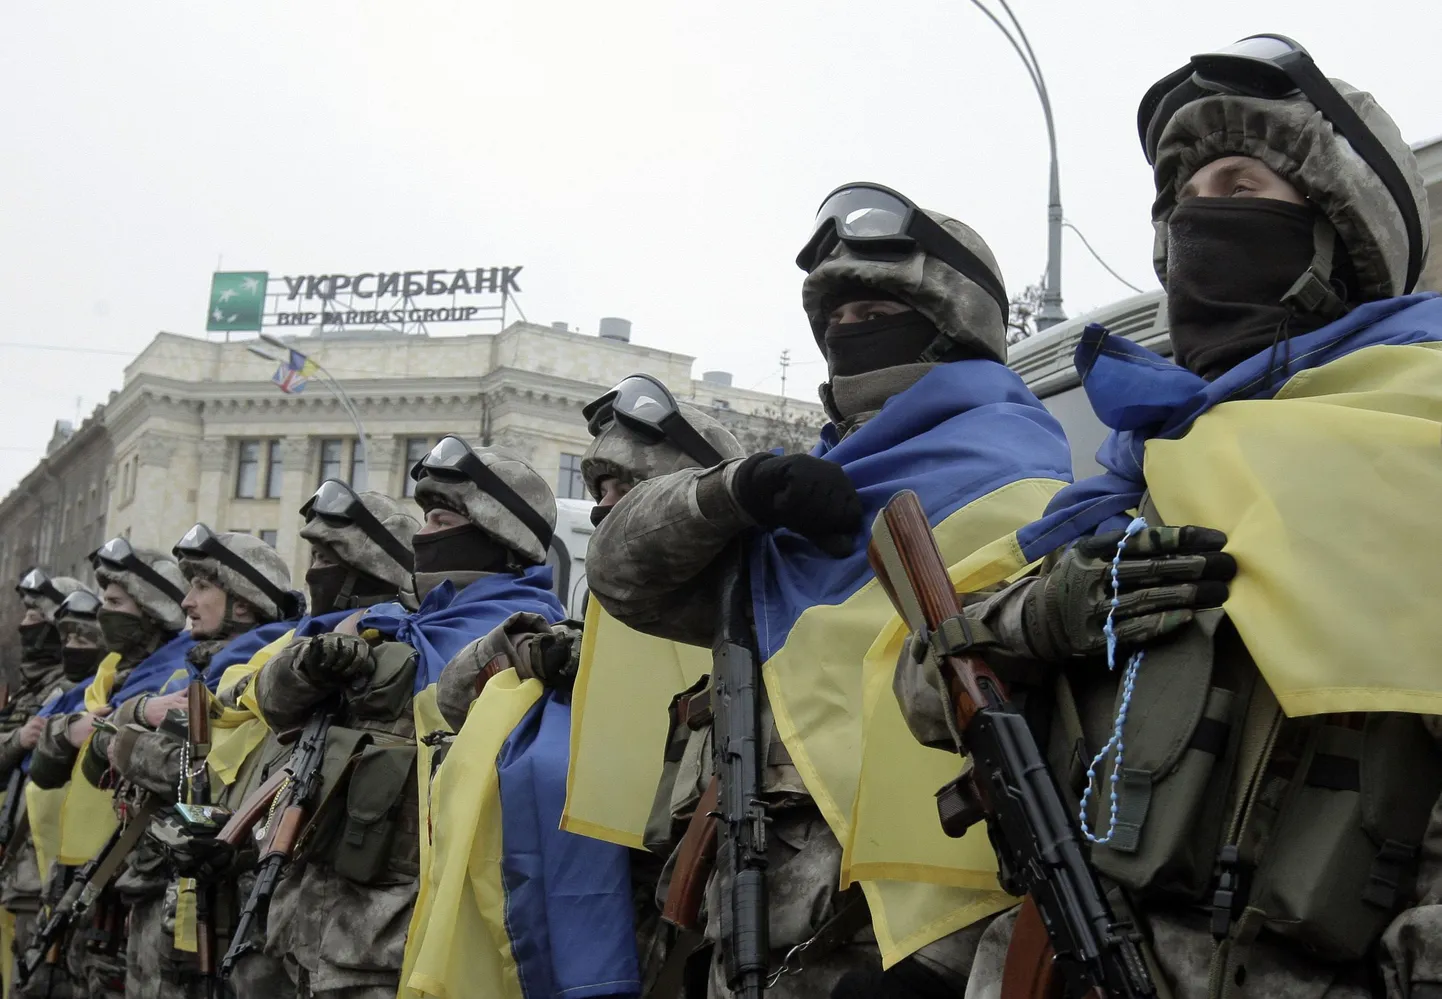 Ukrainian special forces in Kharkiv before being sent on a mission on January 30, 2015.